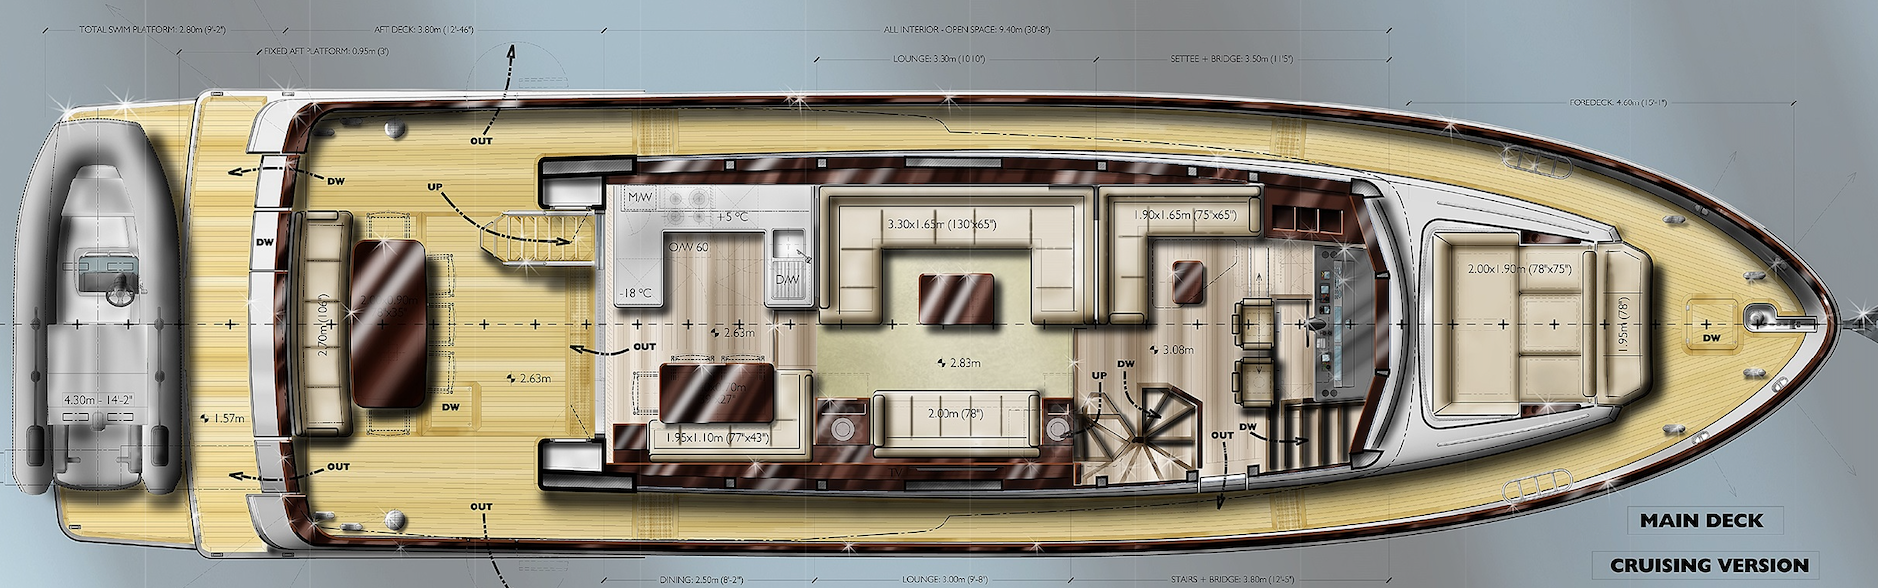 Offshore Yachts, CE Series Cruising, Main Deck drawing